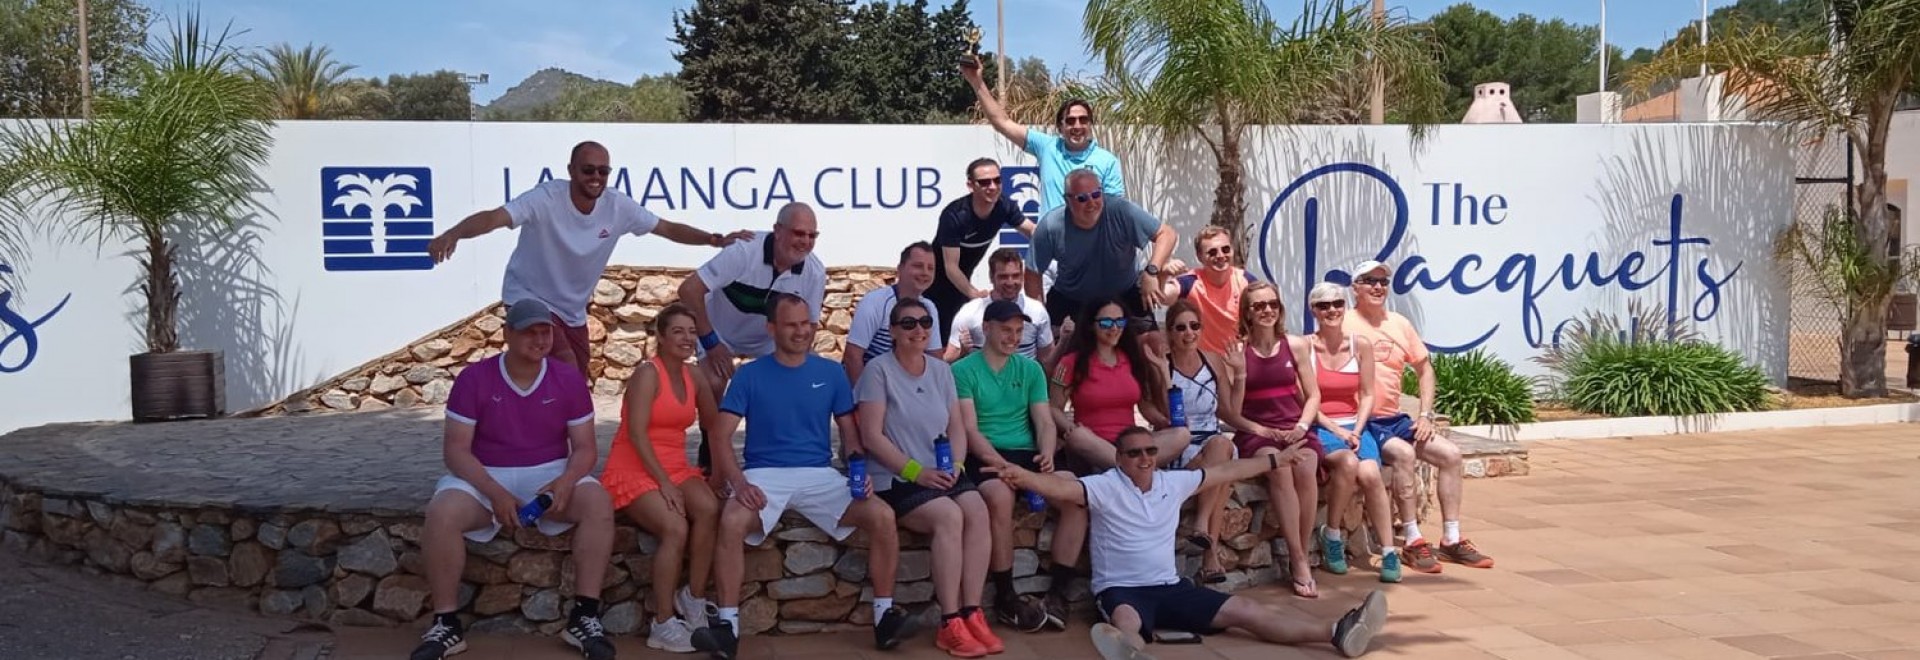 Weekend Warriors Package  - The Racquets Club at La Manga, Spain